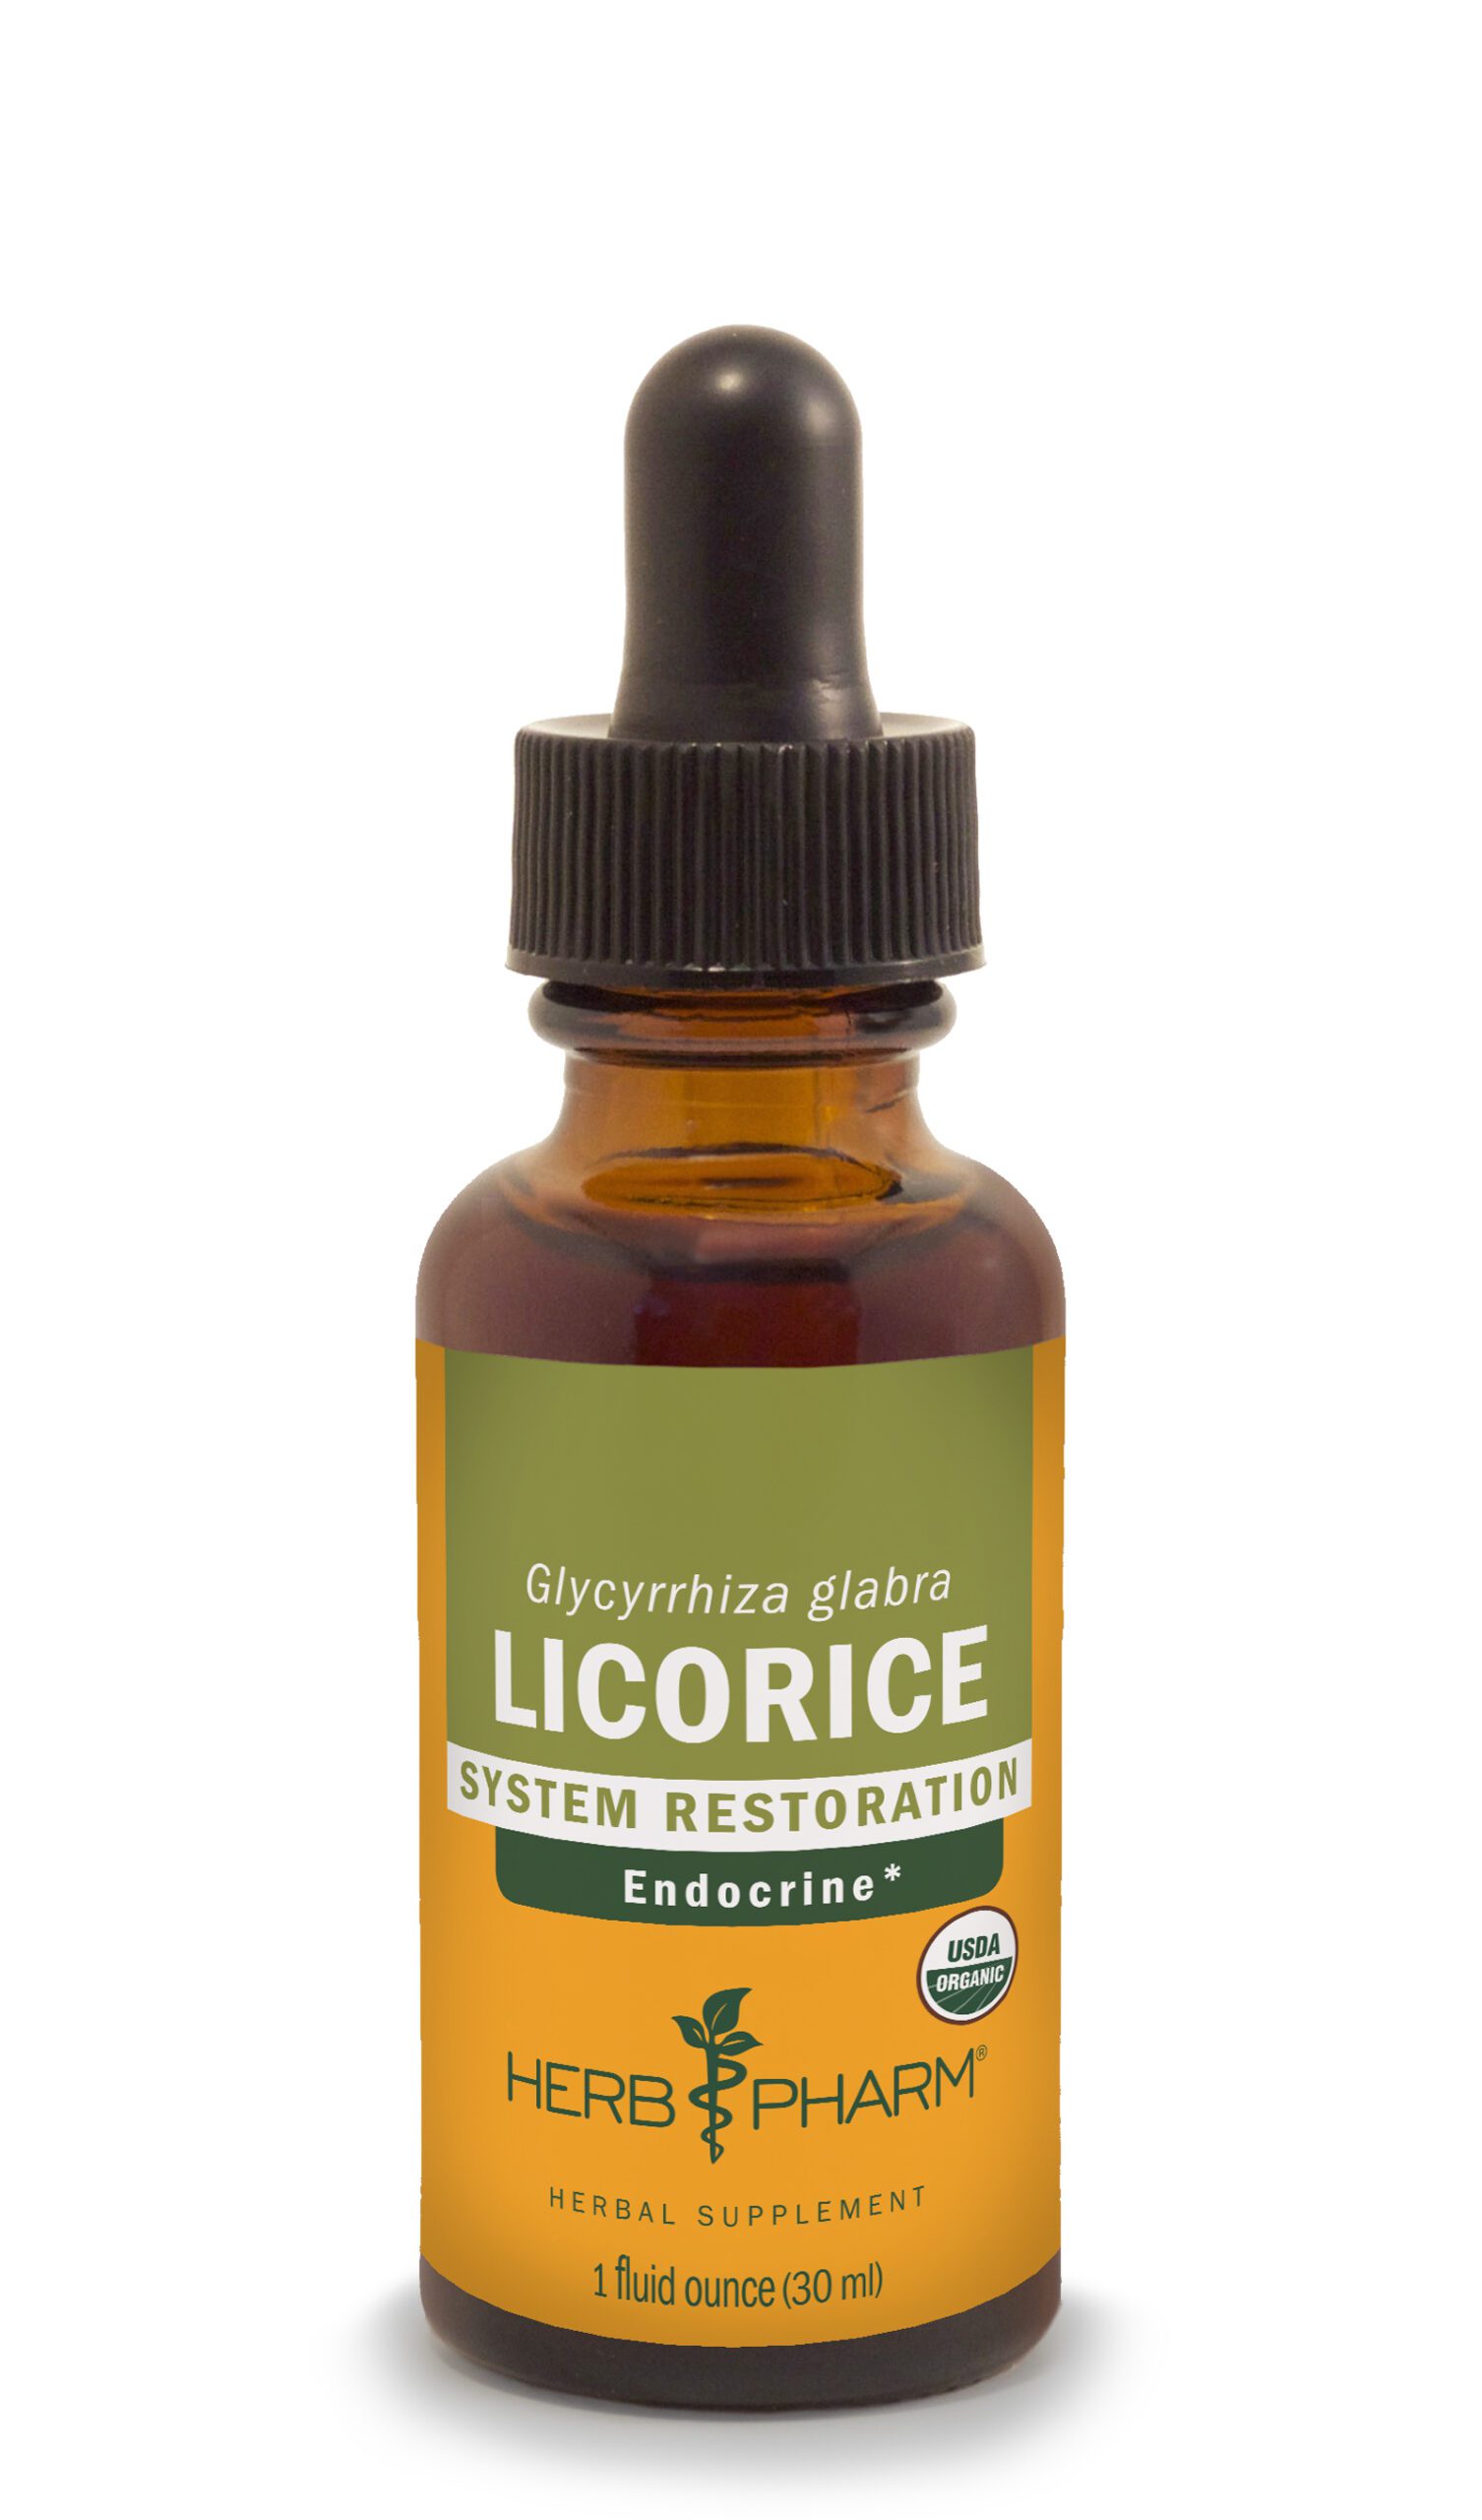 Product Listing Image for Herb Pharm Licorice Tincture 1oz